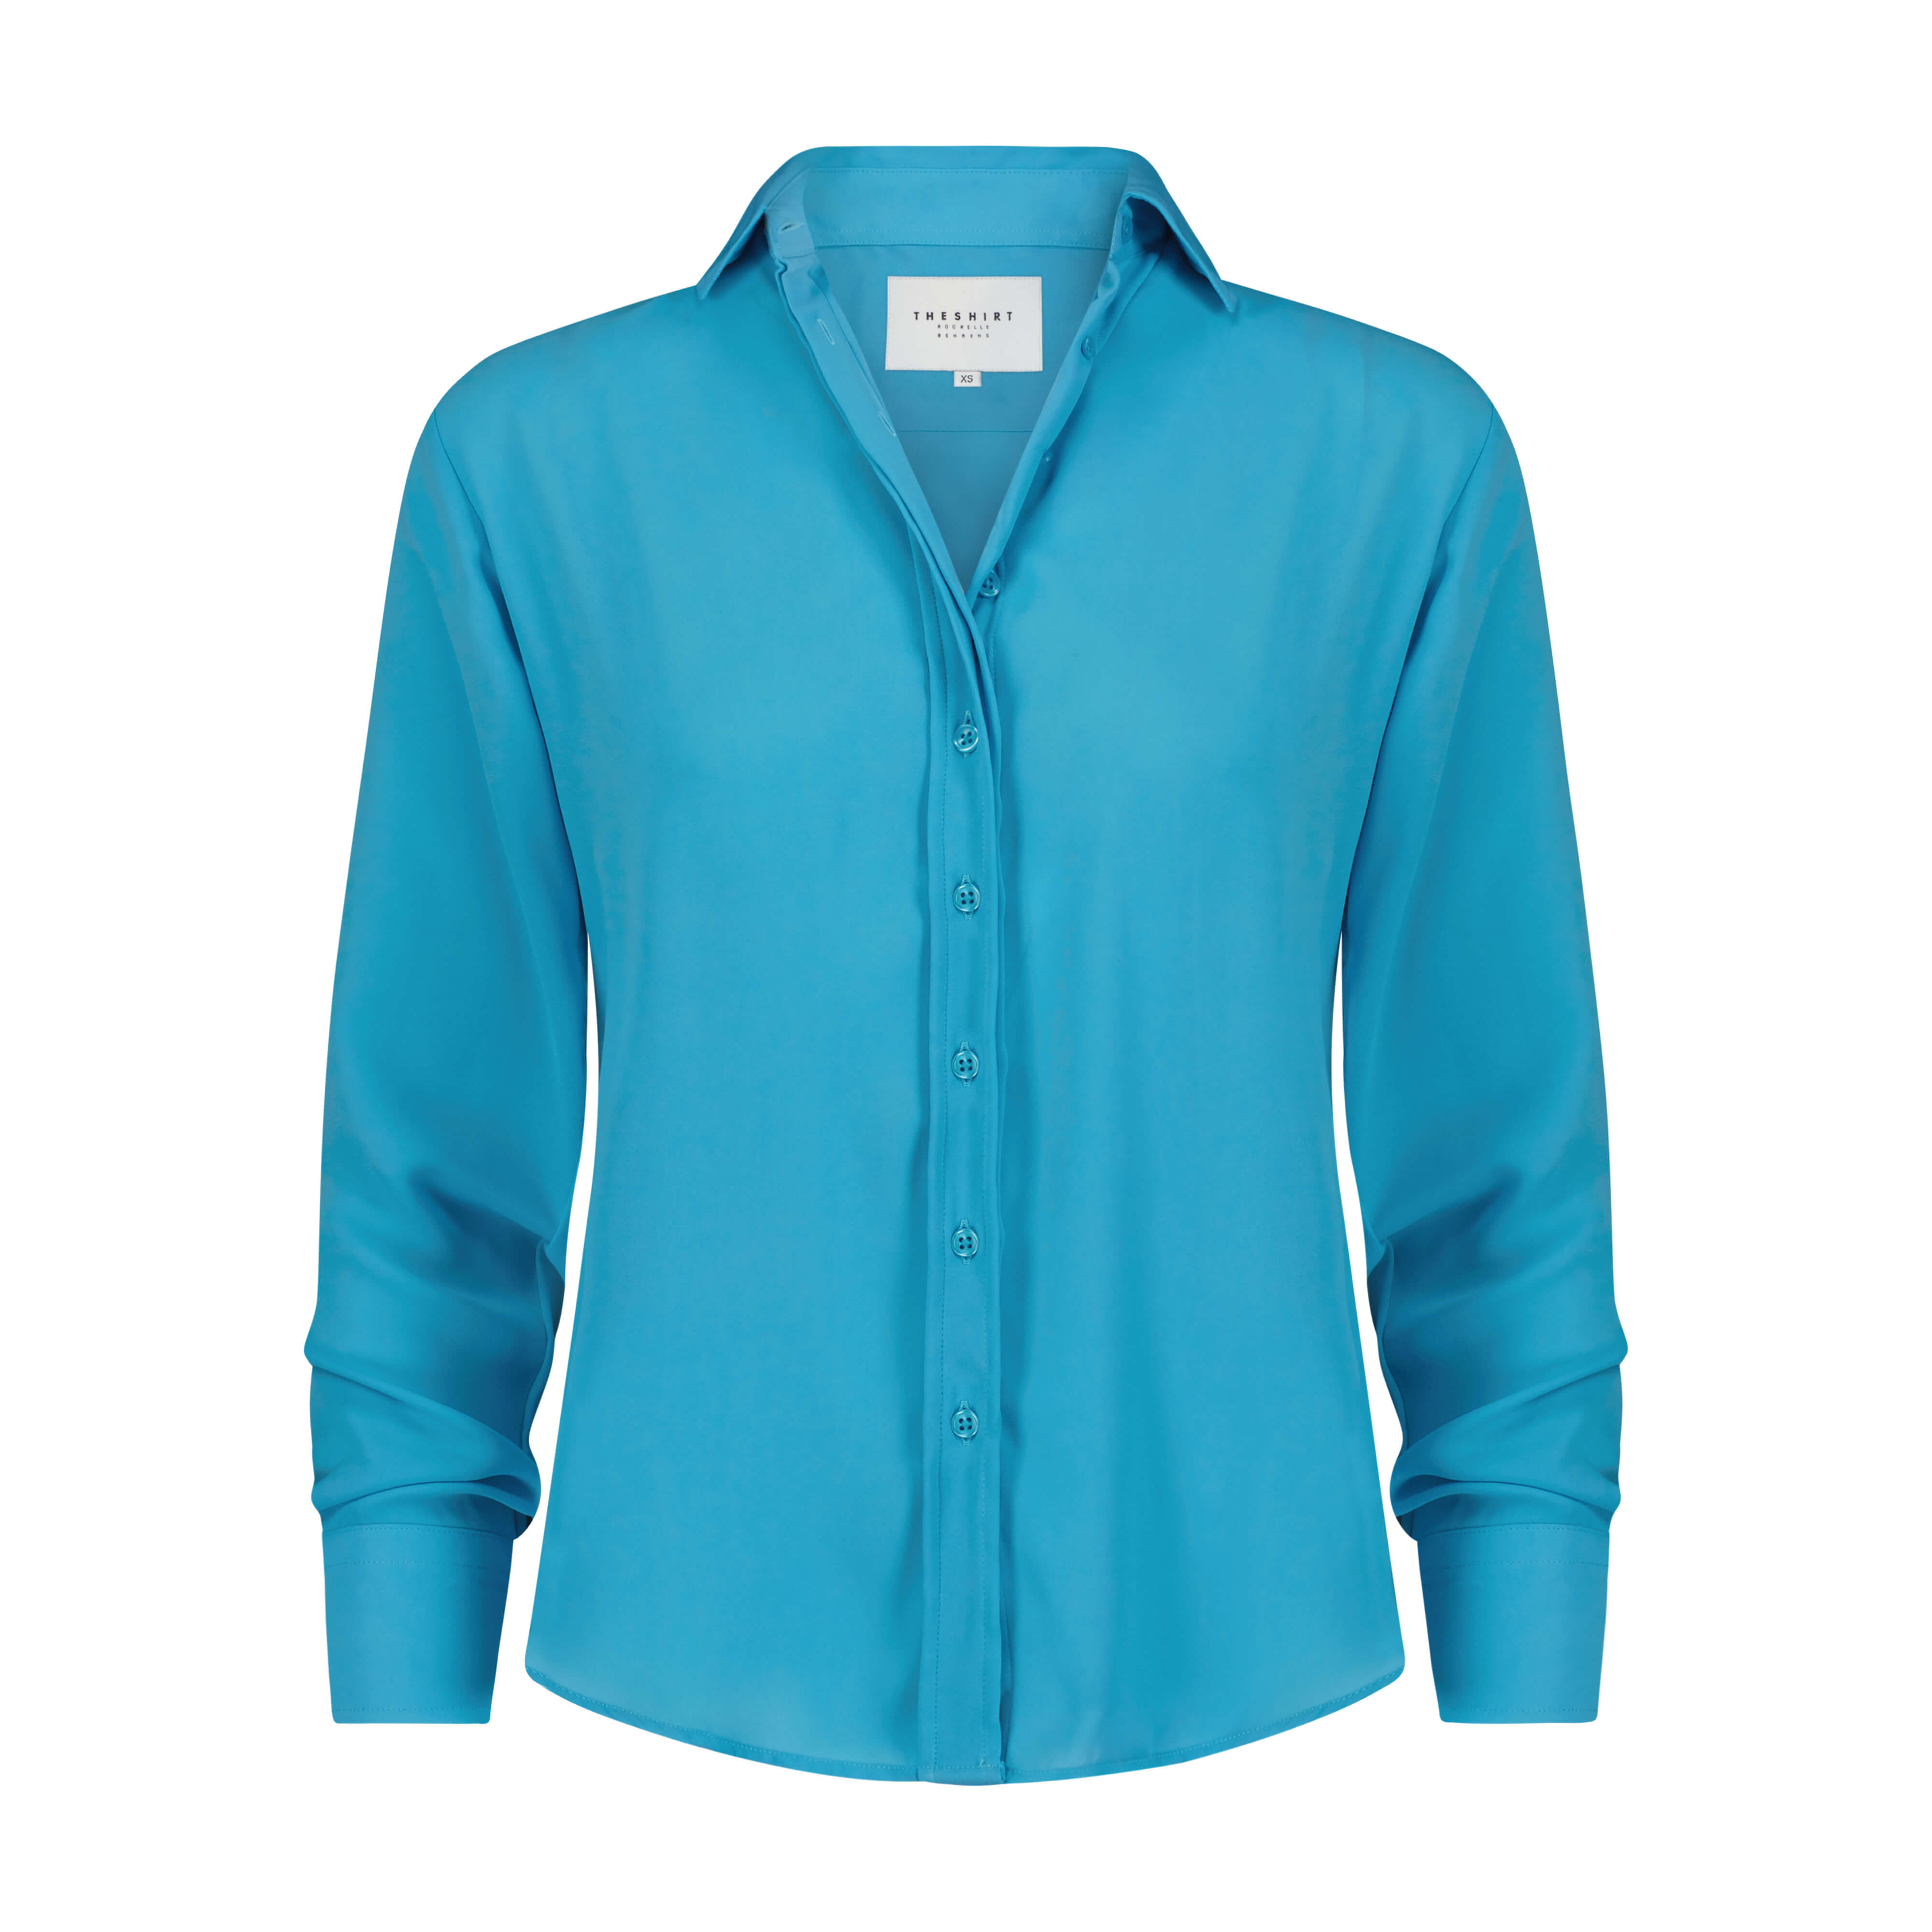 The Shirt by Rochelle Behrens - The Signature Shirt - Turquoise